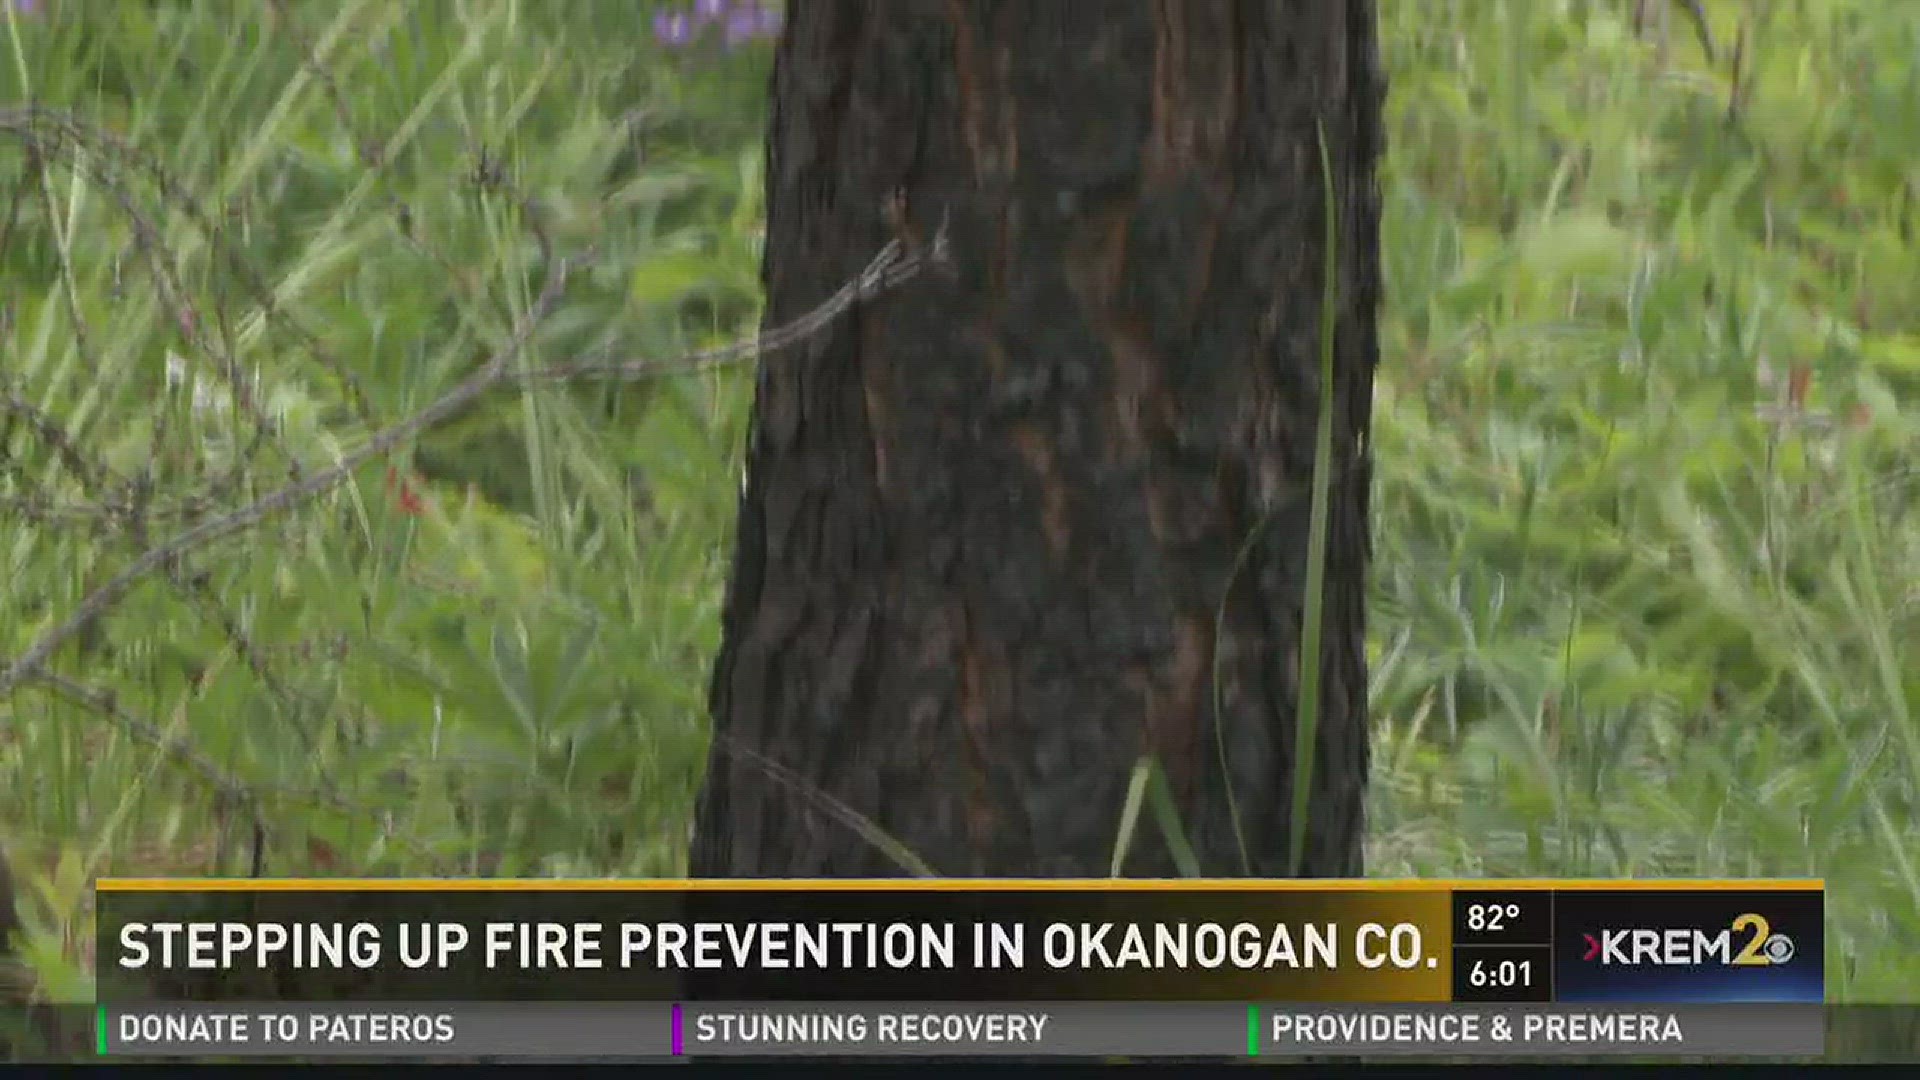 State agencies step up fire prevention in Okanogan Co.